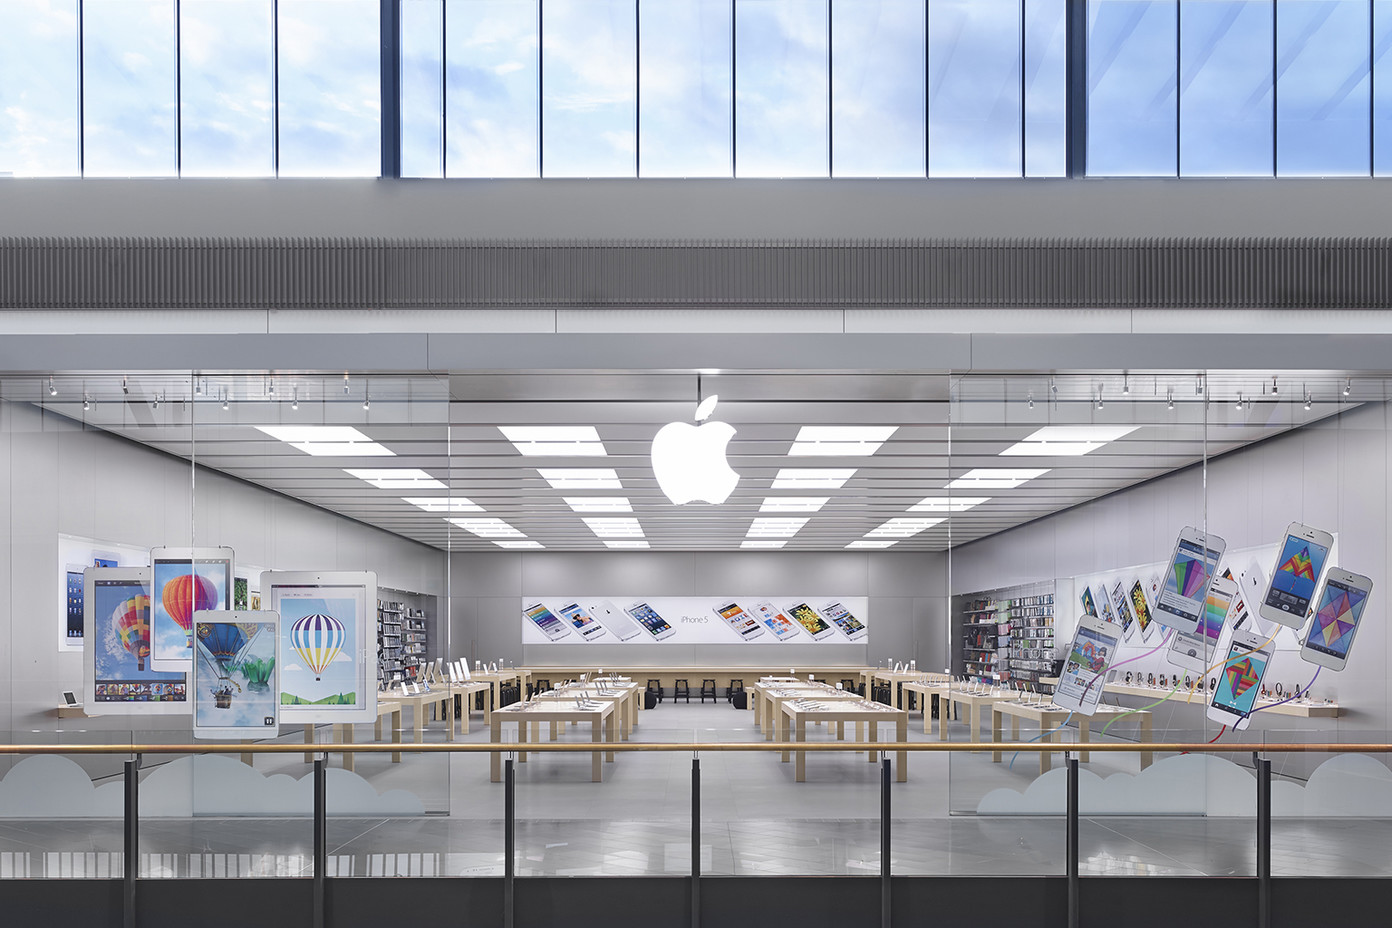 Apple apologizes for episode involving racism at Retail Store in Australia